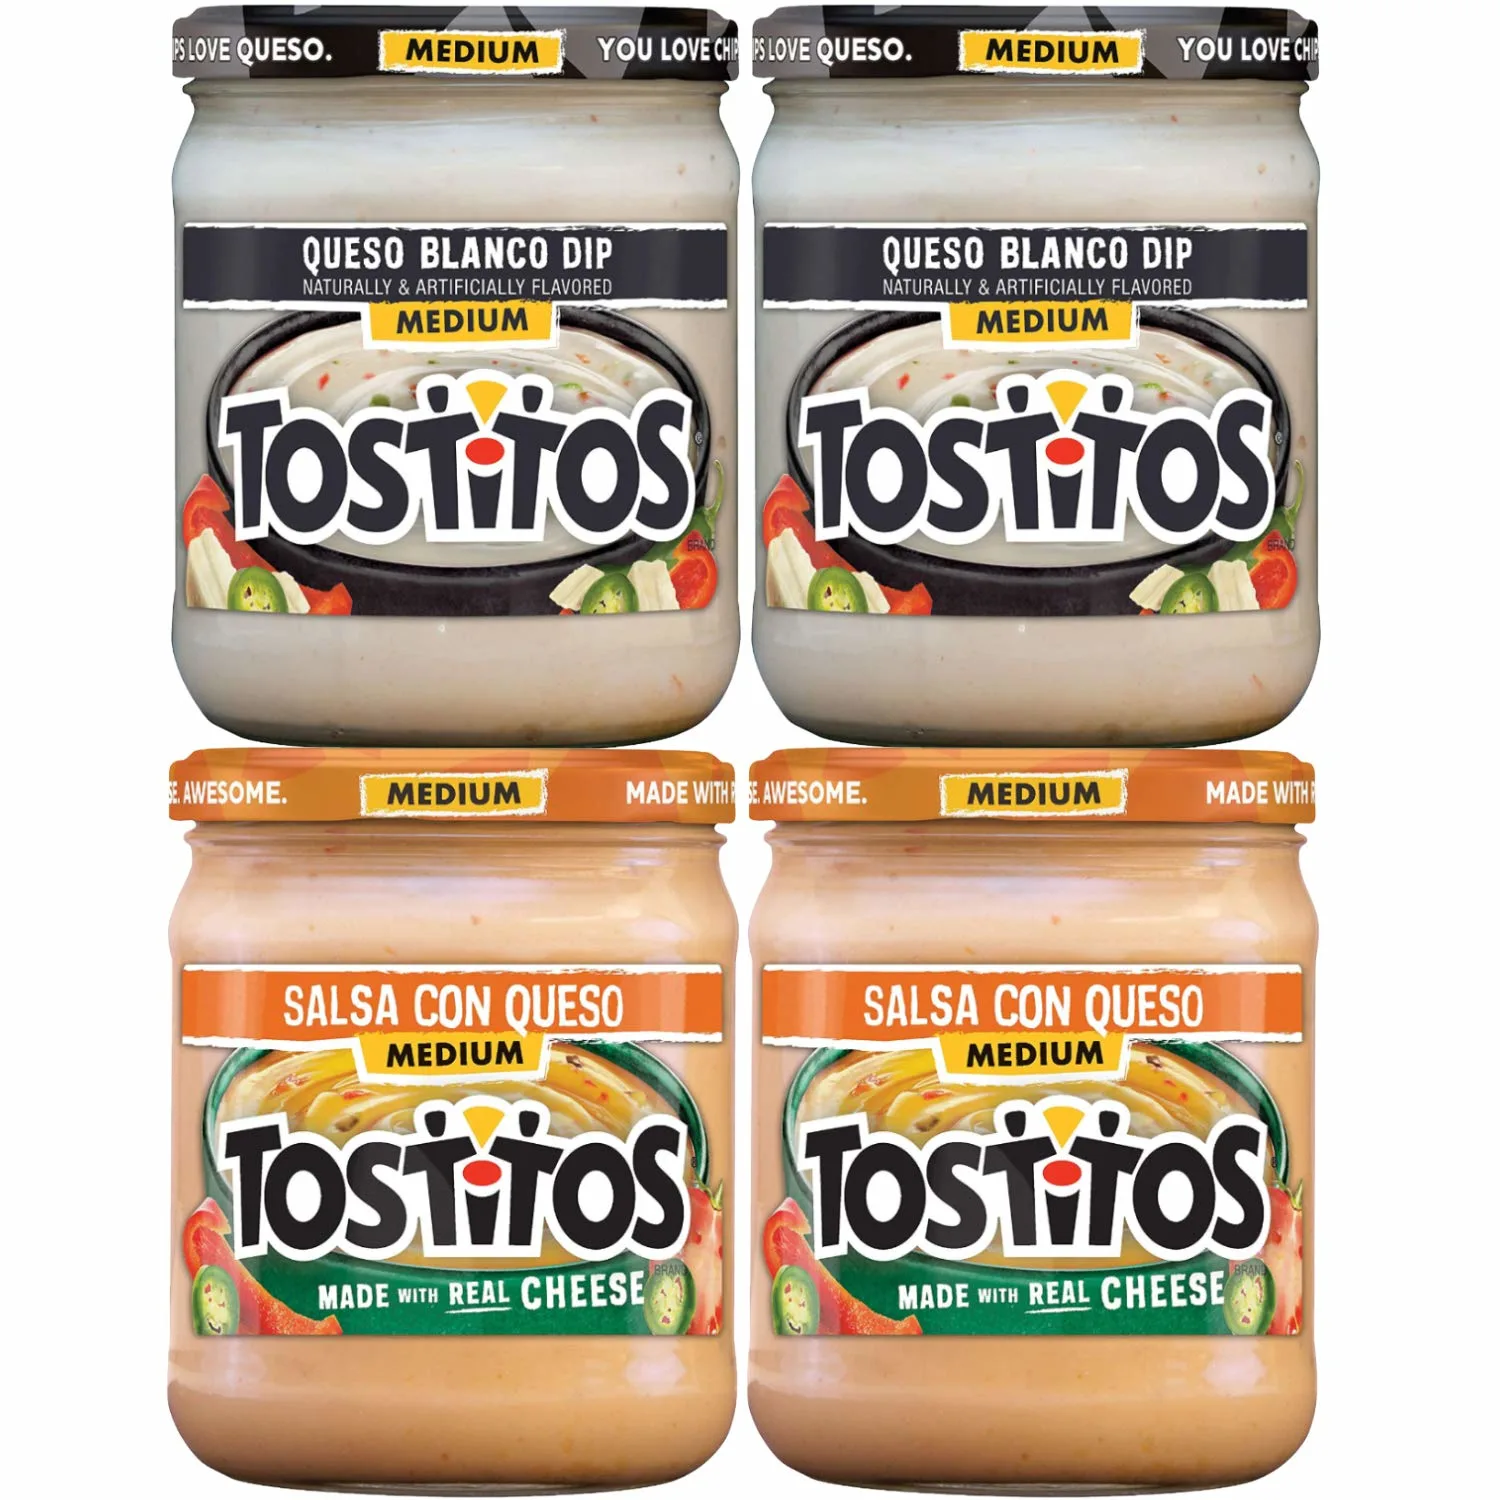 Tostitos Queso Variety Pack,
